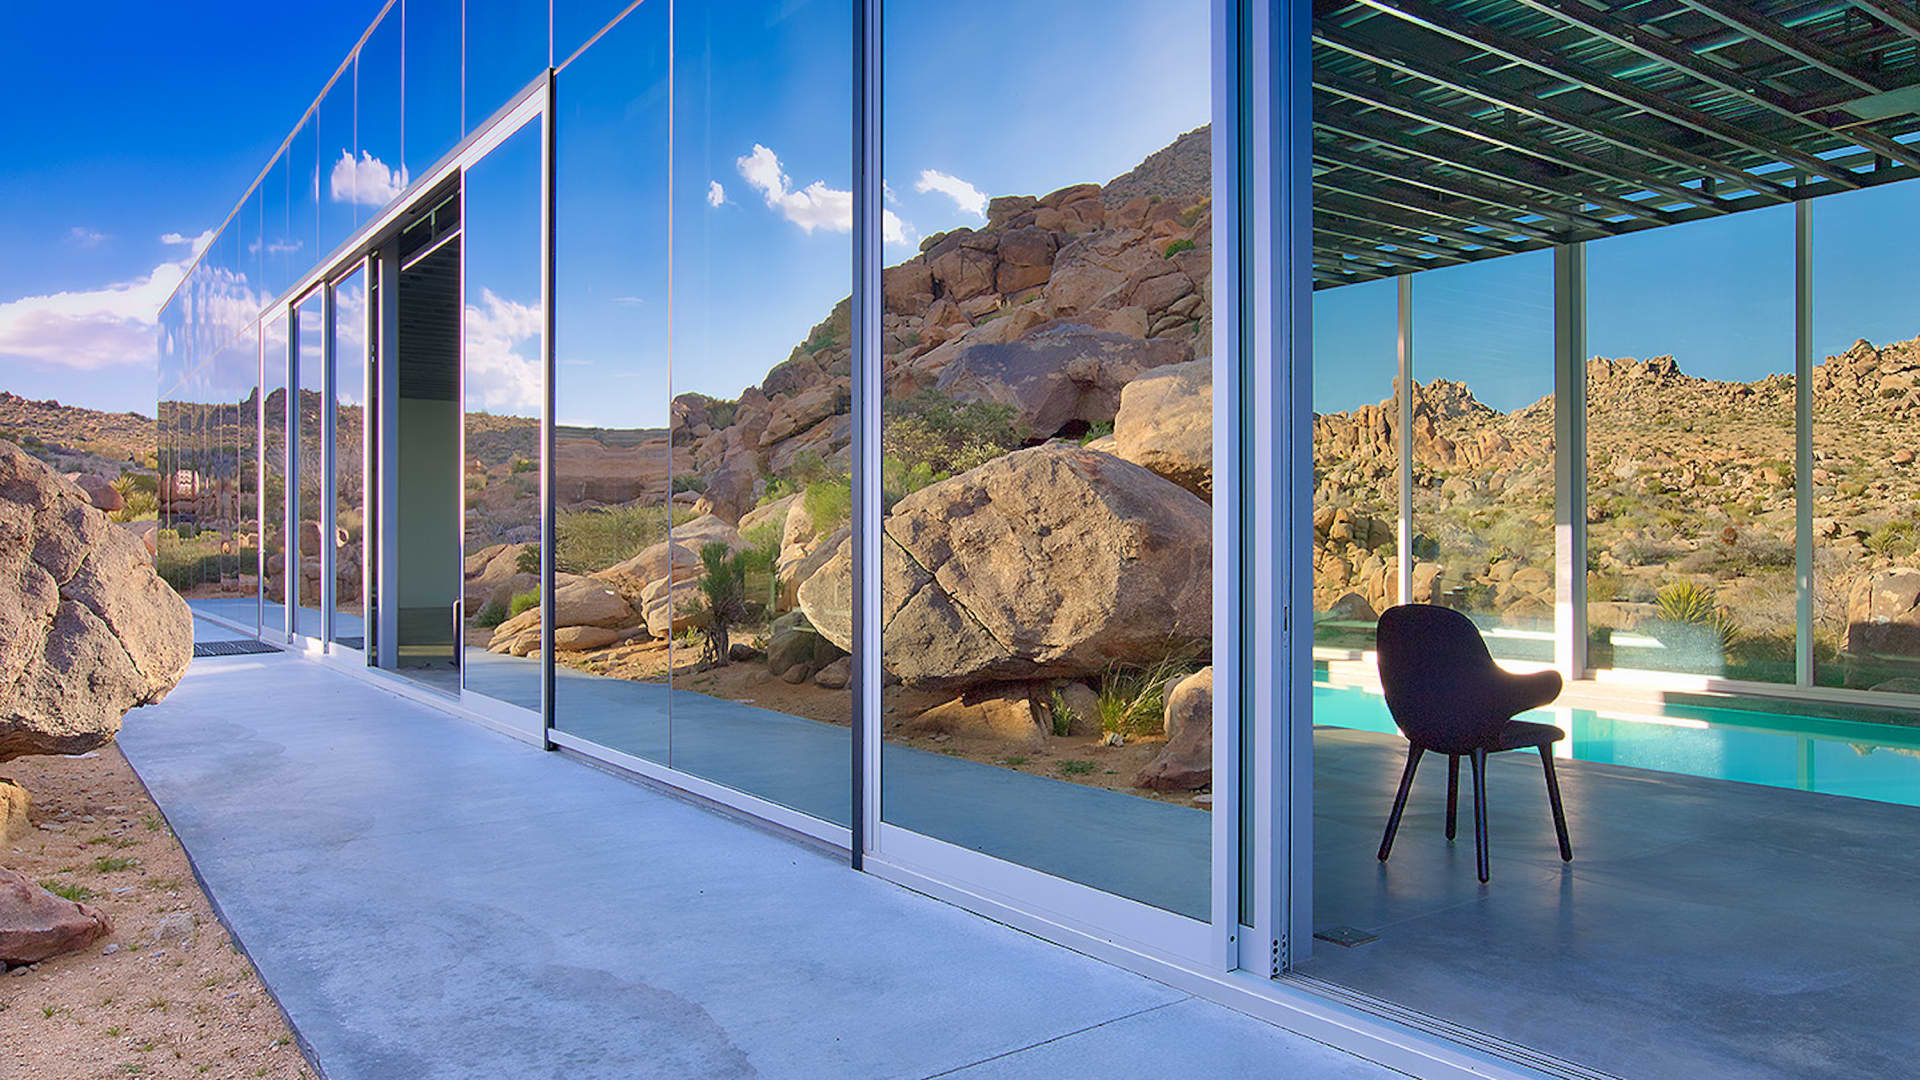 The home's west-facing glass wall slides open to the desert landscape.